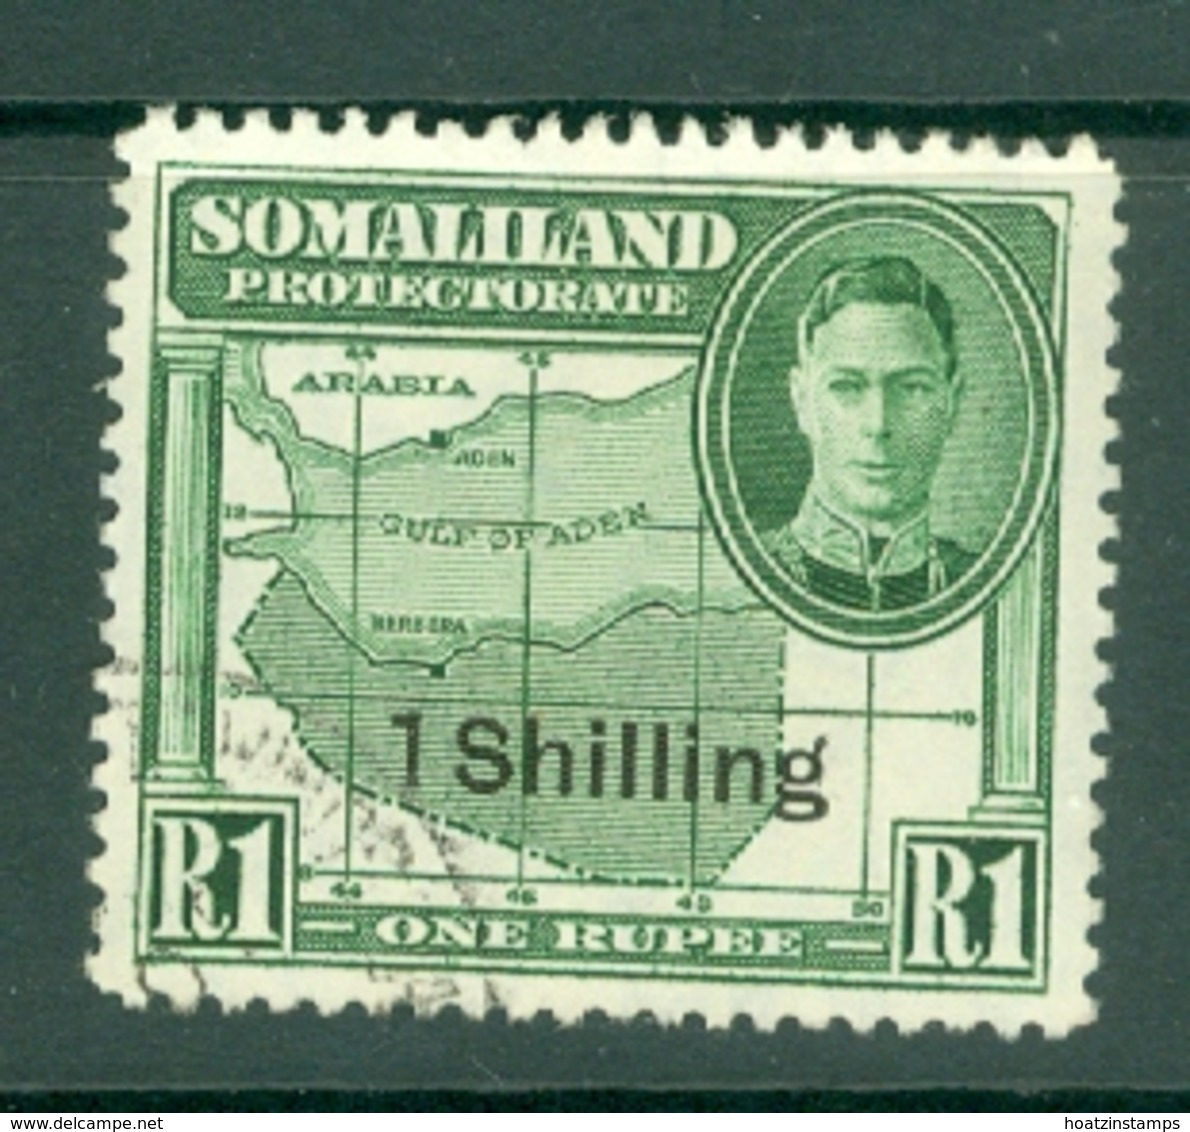 Somaliland Protectorate: 1951   KGVI - Surcharge    SG132     1/- On 1R     Used - Somaliland (Protectorate ...-1959)